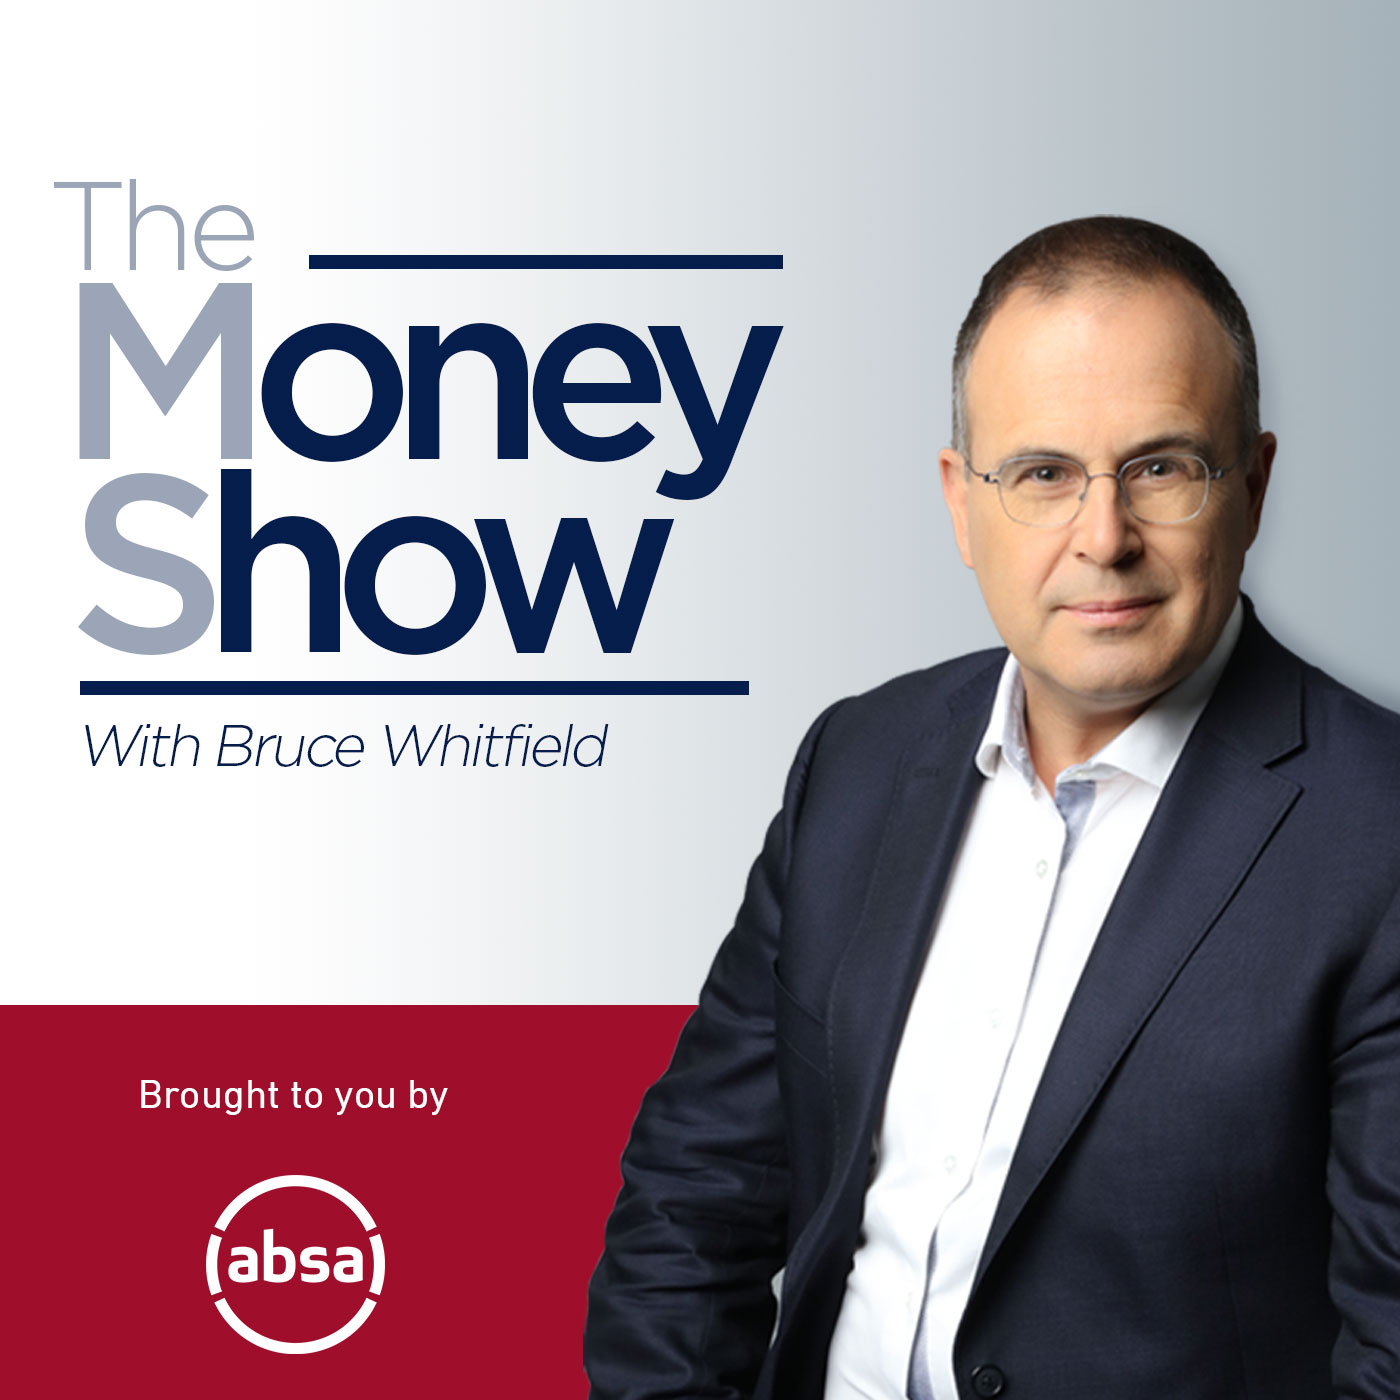 The Money Show Explainer: The Presidency’s goal of achieving 3% to 5% economic growth and generating 2.5 million jobs by 2030.